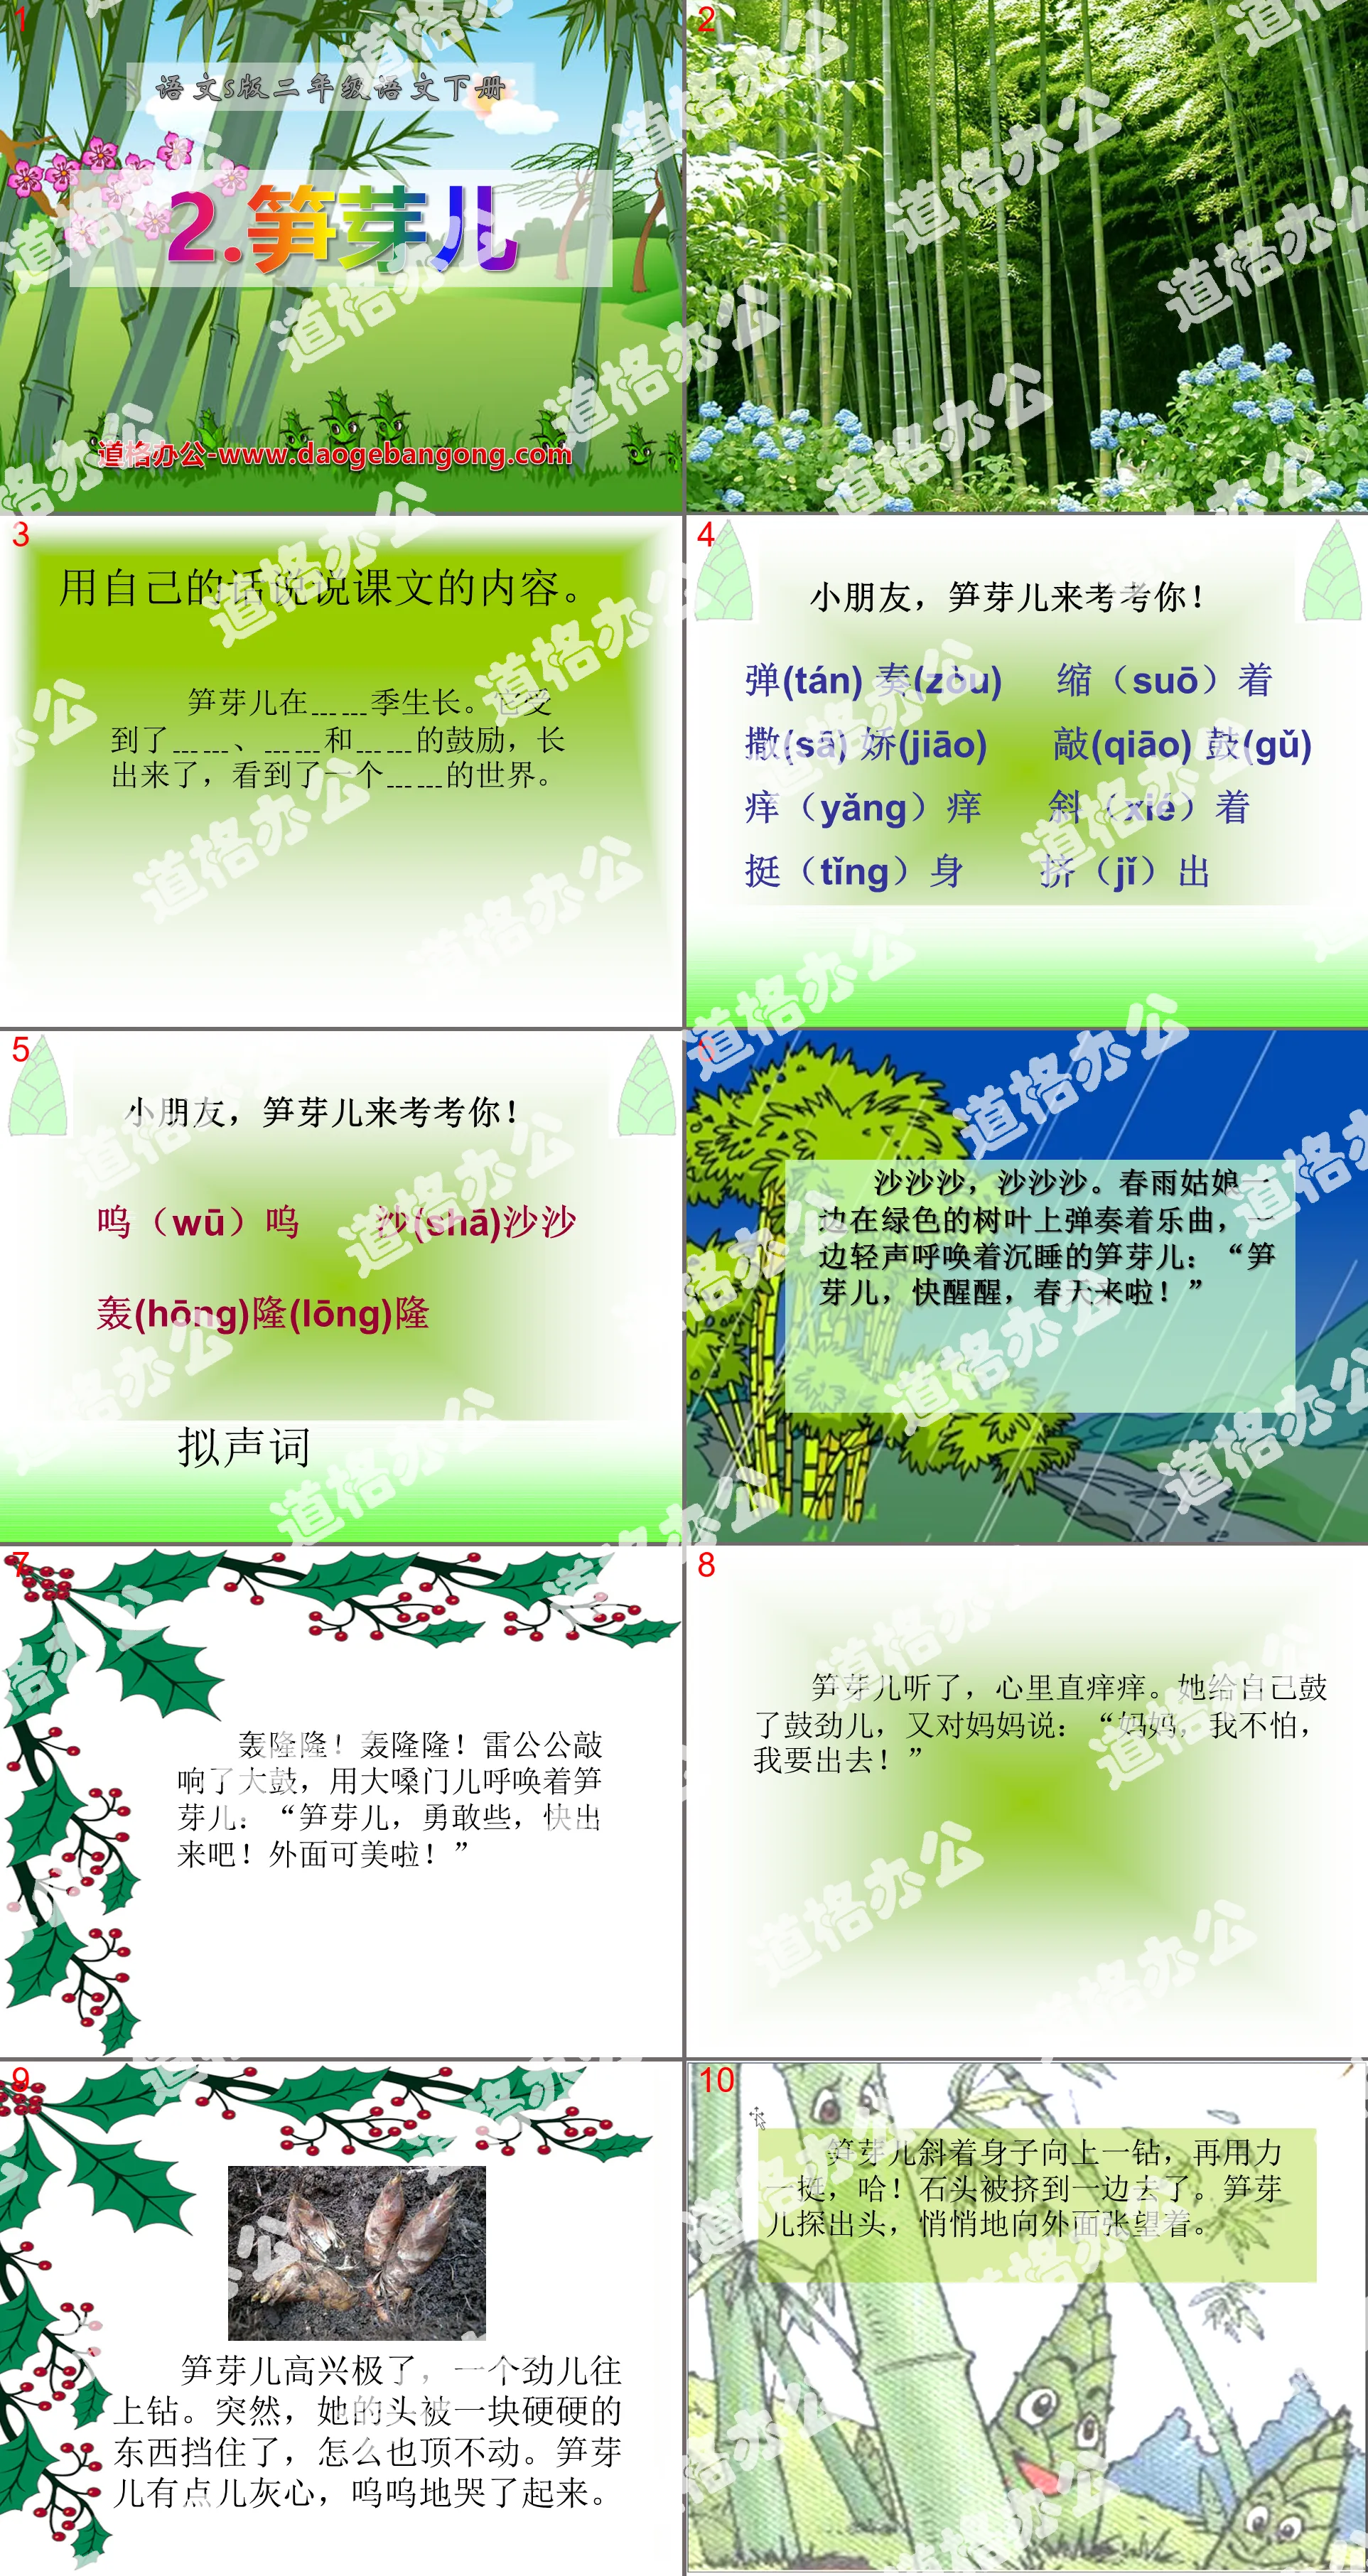 "Bamboo Shoots" PPT courseware 9